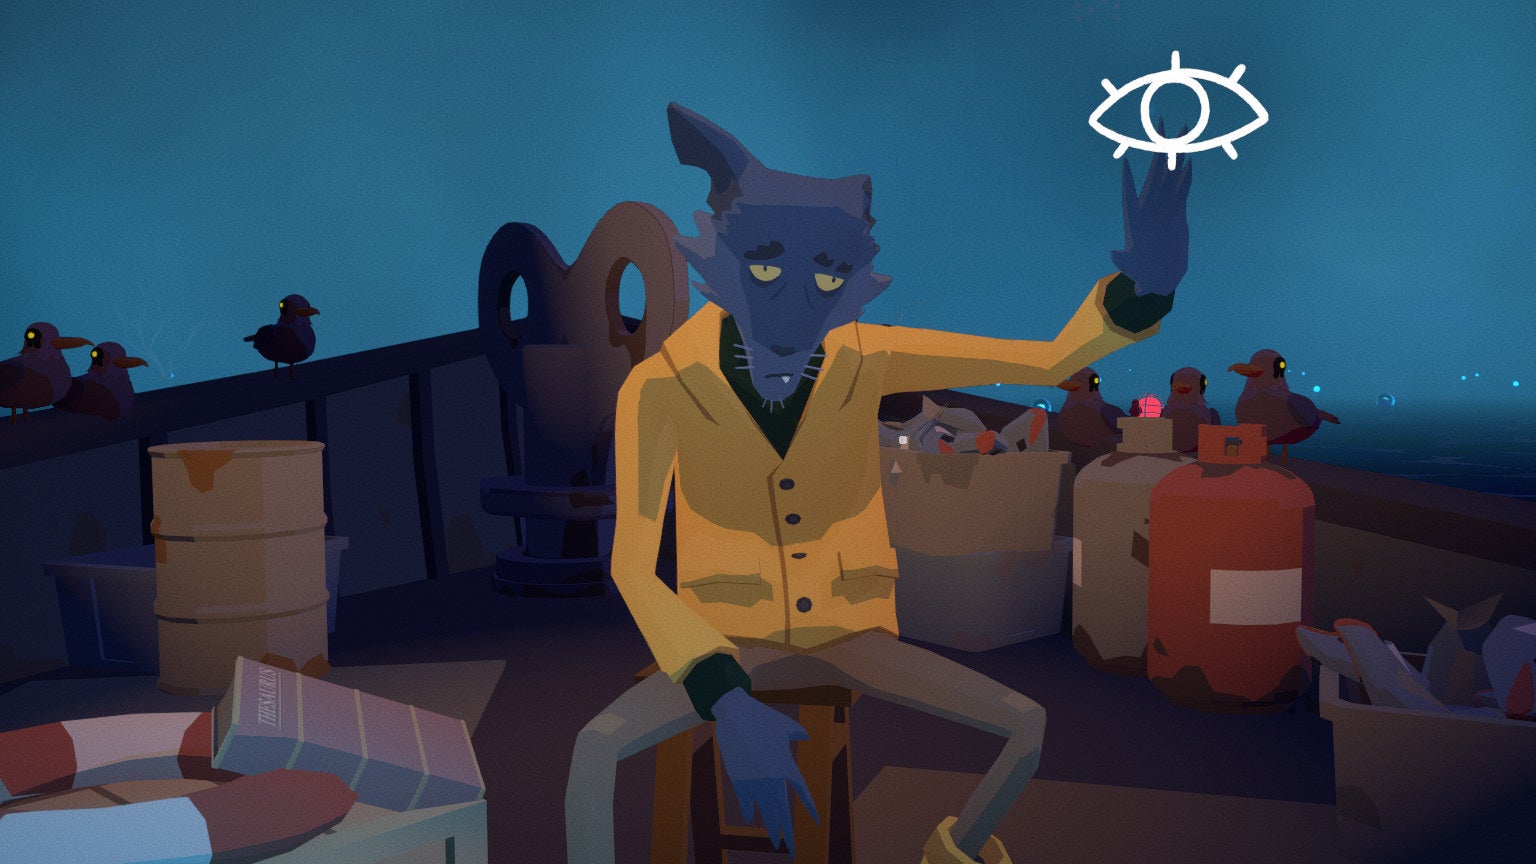 Screenshots of Before Your Eyes show Ferryman, a messy anthropomorphic dog, dressed as a sailor.